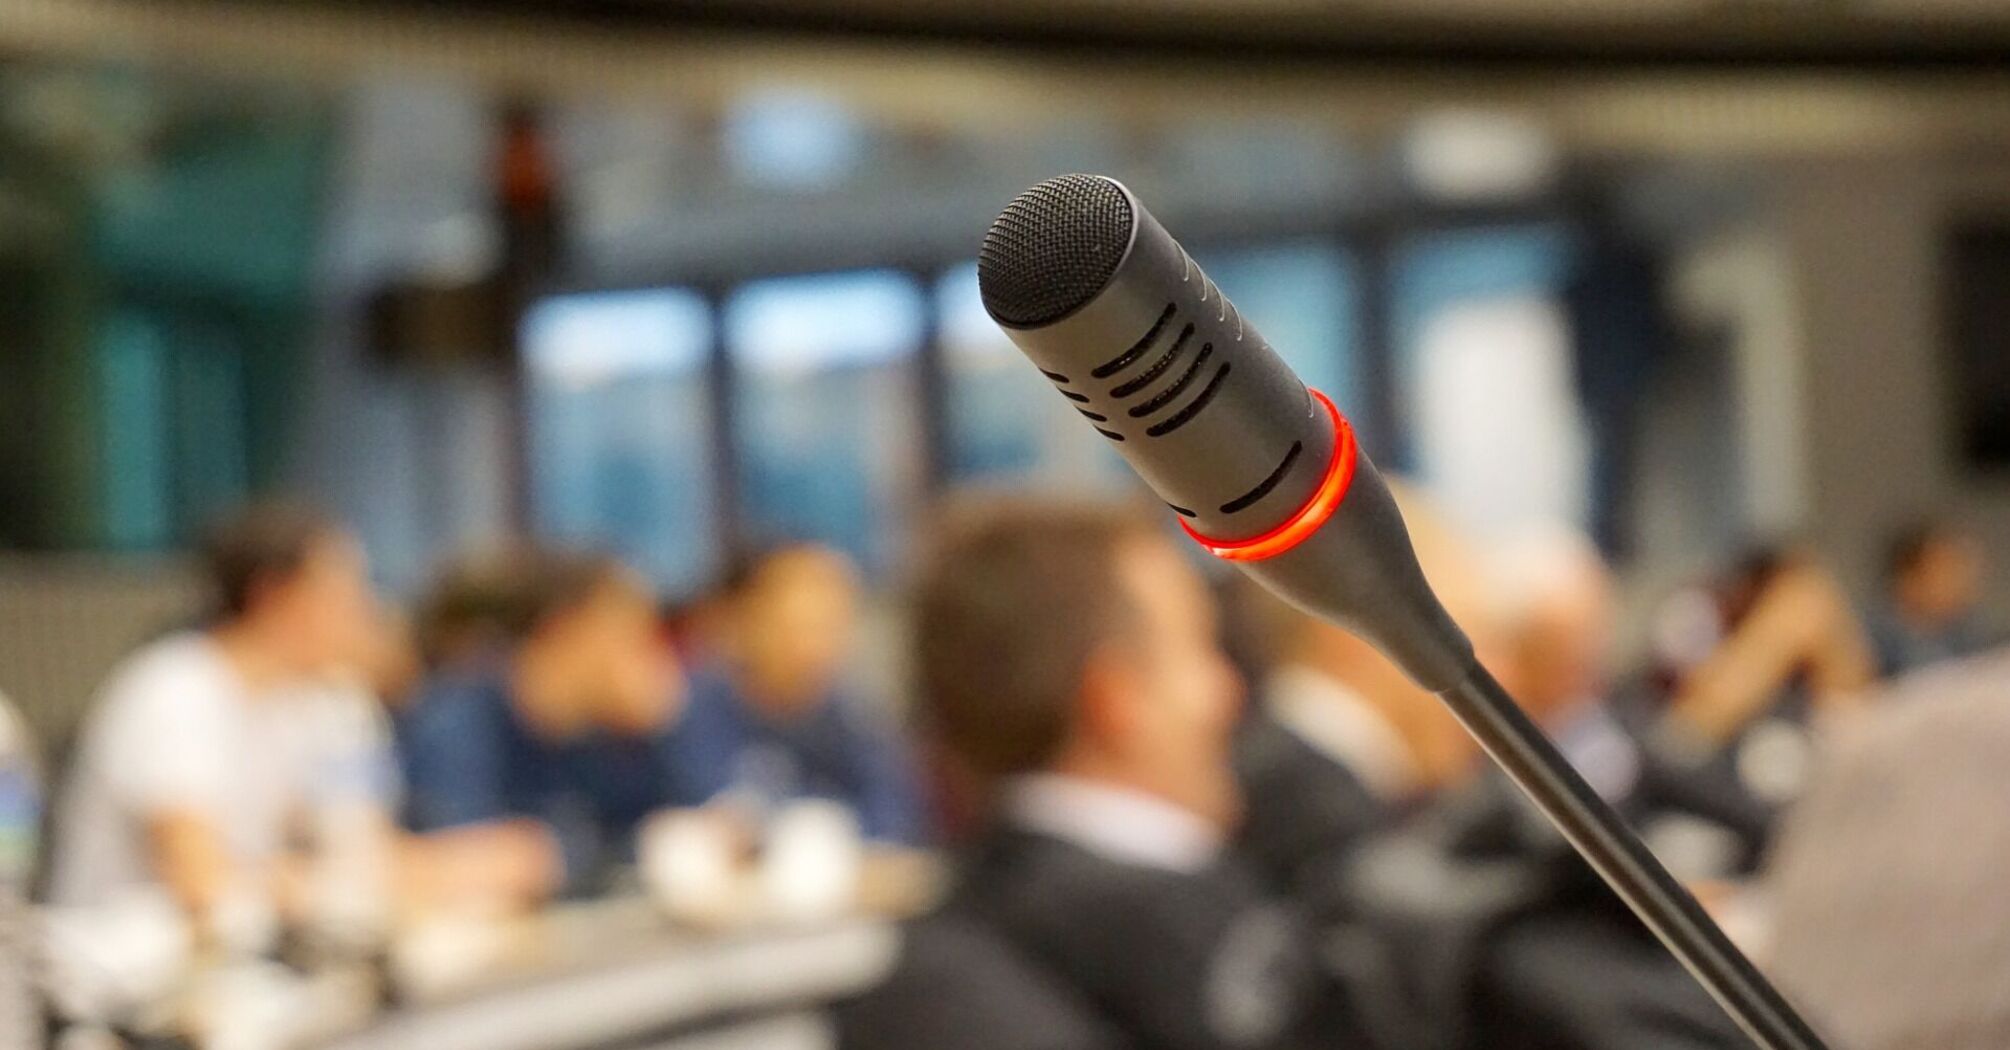 A microphone in focus with a glowing red light, against a blurred background of people in a conference or meeting setting